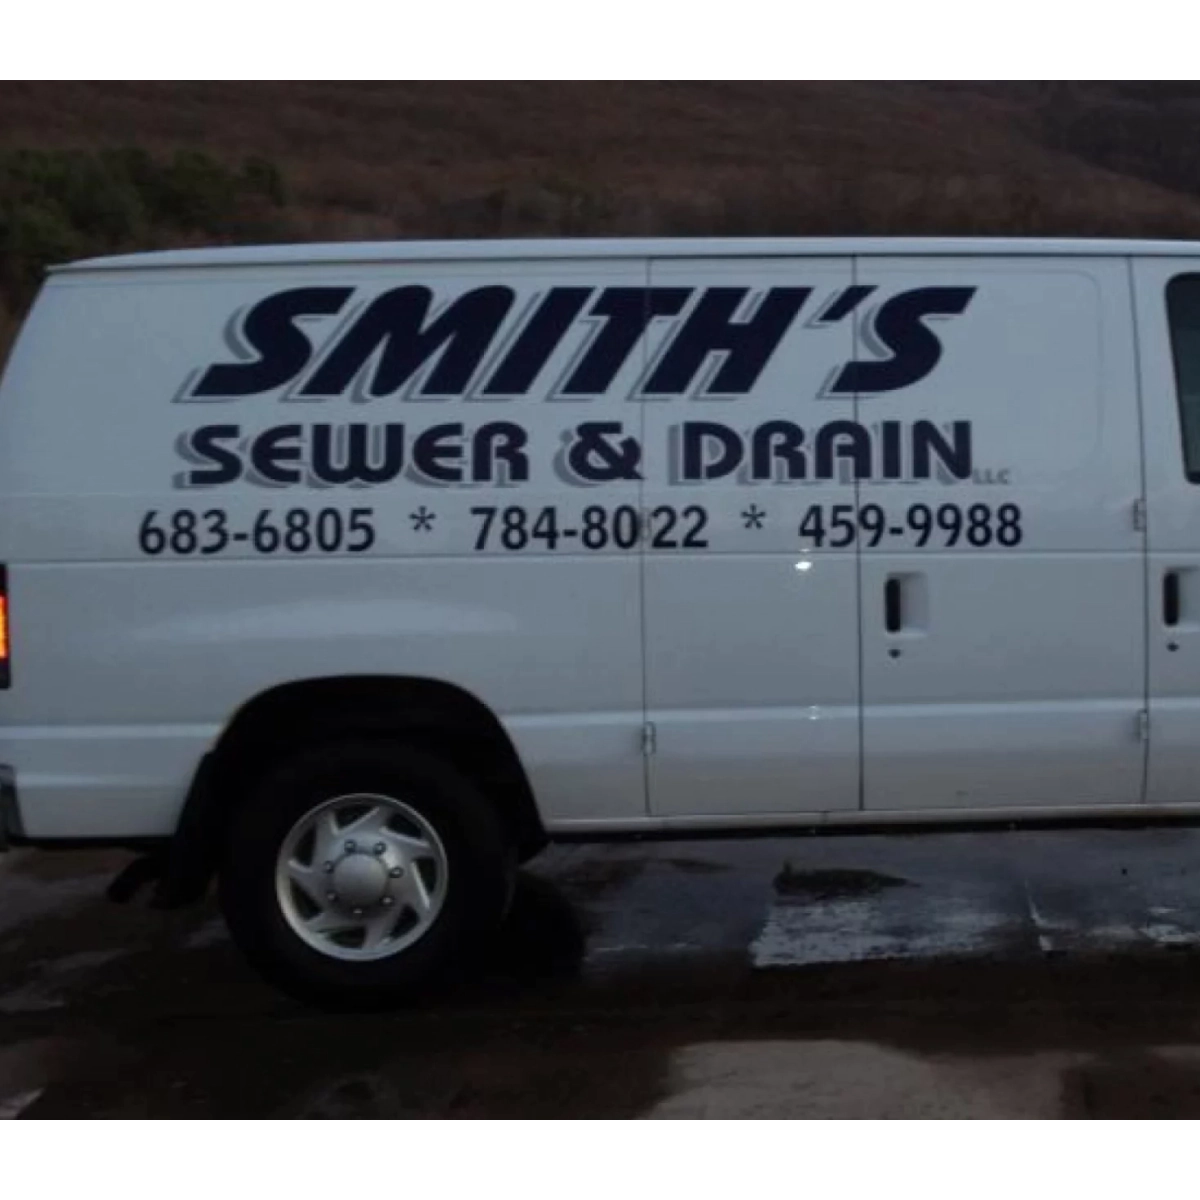 white van with the smiths logo and information and a mountain behind